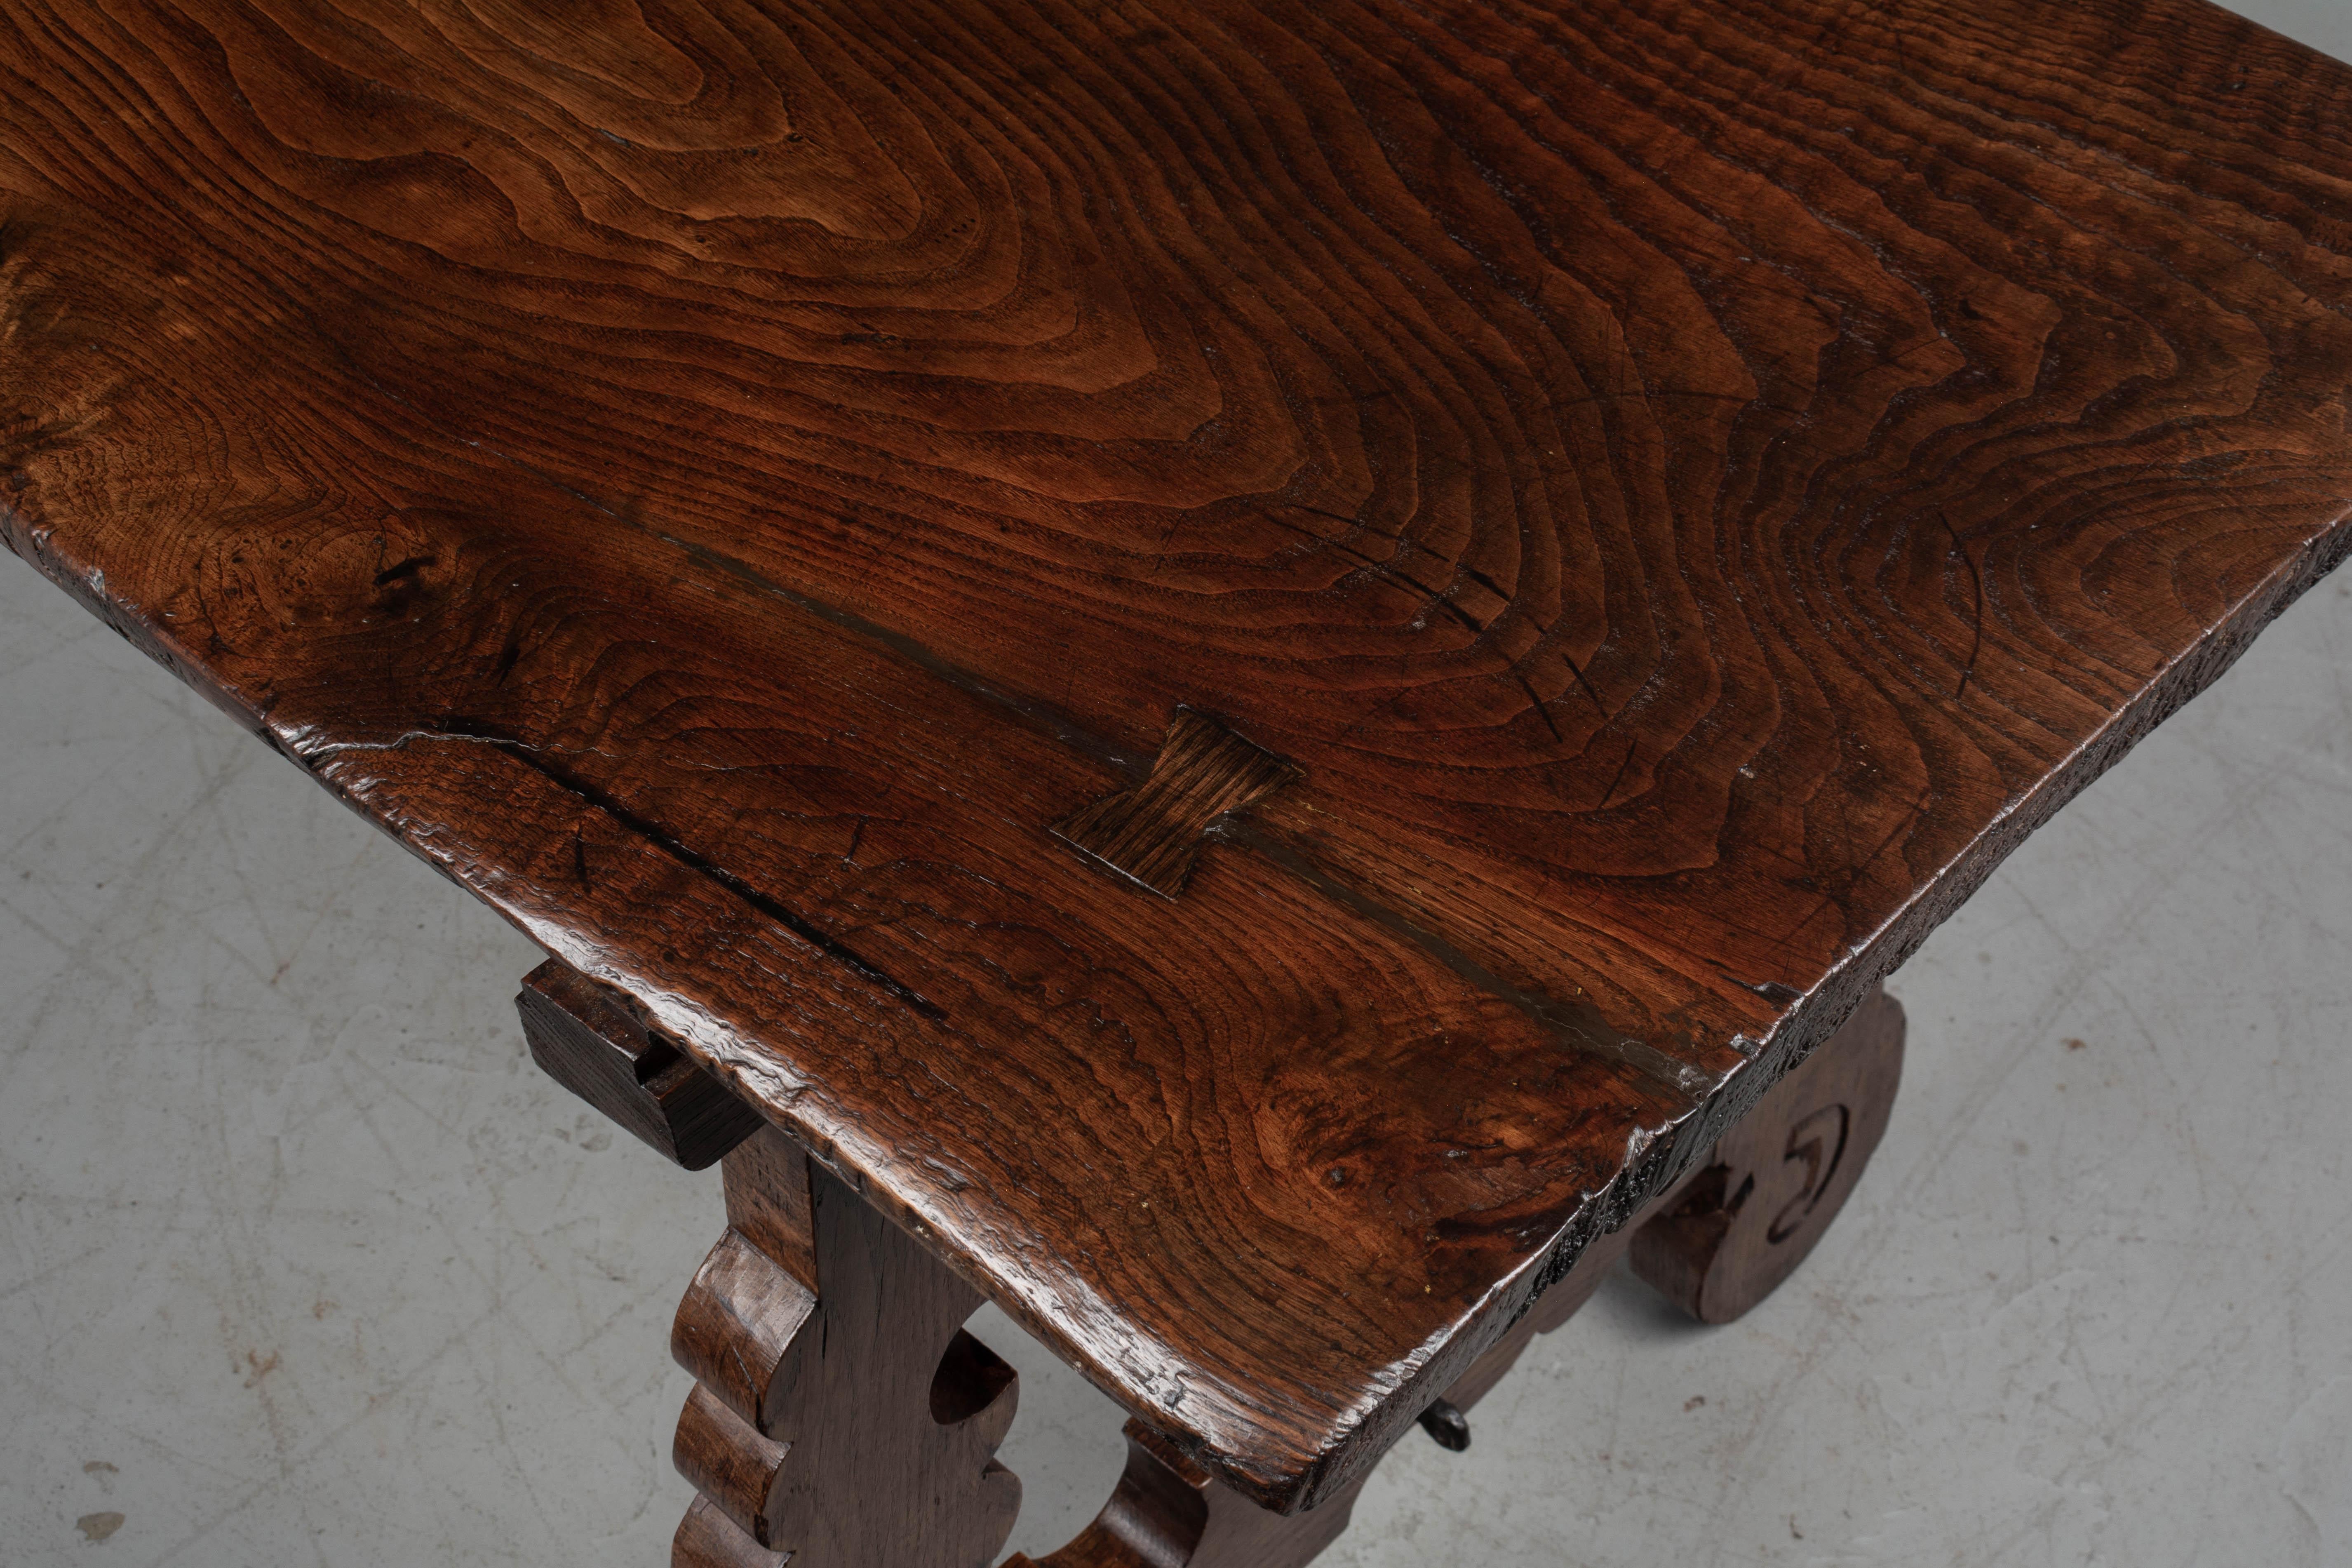 Hand-Crafted Early 18th Century Spanish Baroque Table or Refectory Table